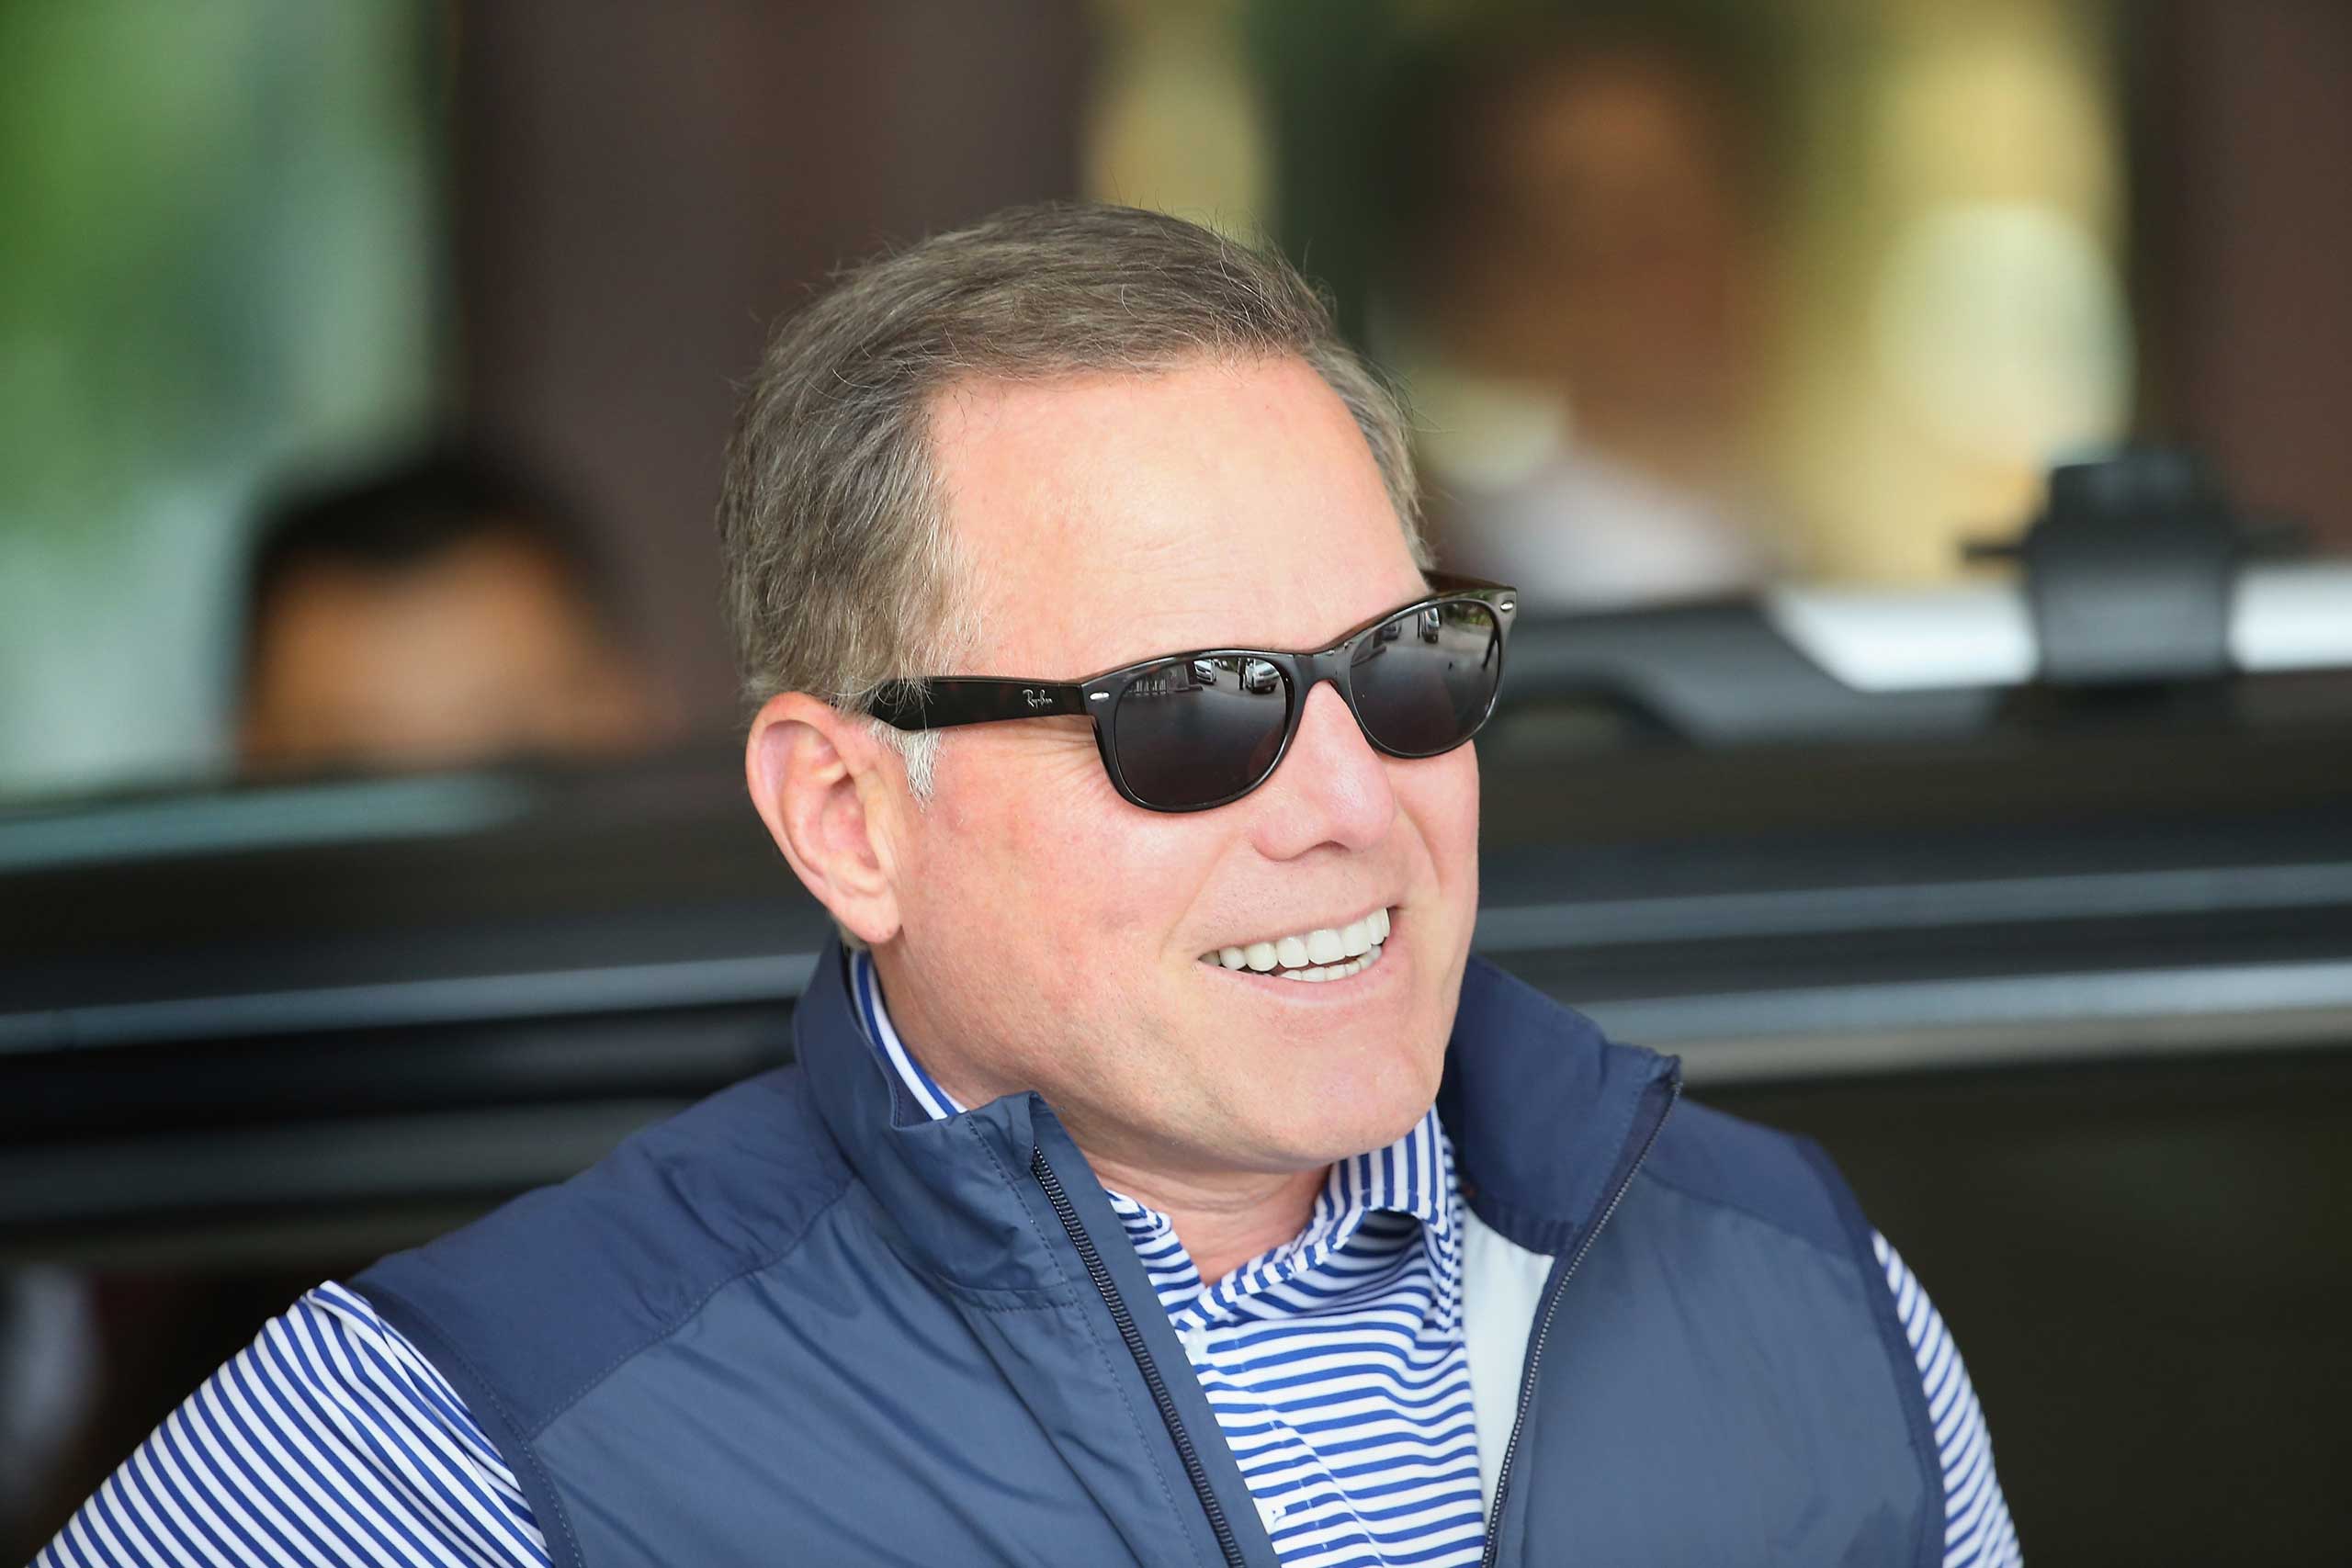 David M. Zaslav, president and chief executive officer of Discovery Communications, is interviewed at the Allen &amp; Company Sun Valley Conference in Sun Valley, Idaho, on July 7, 2015. (Scott Olson—Getty Images)